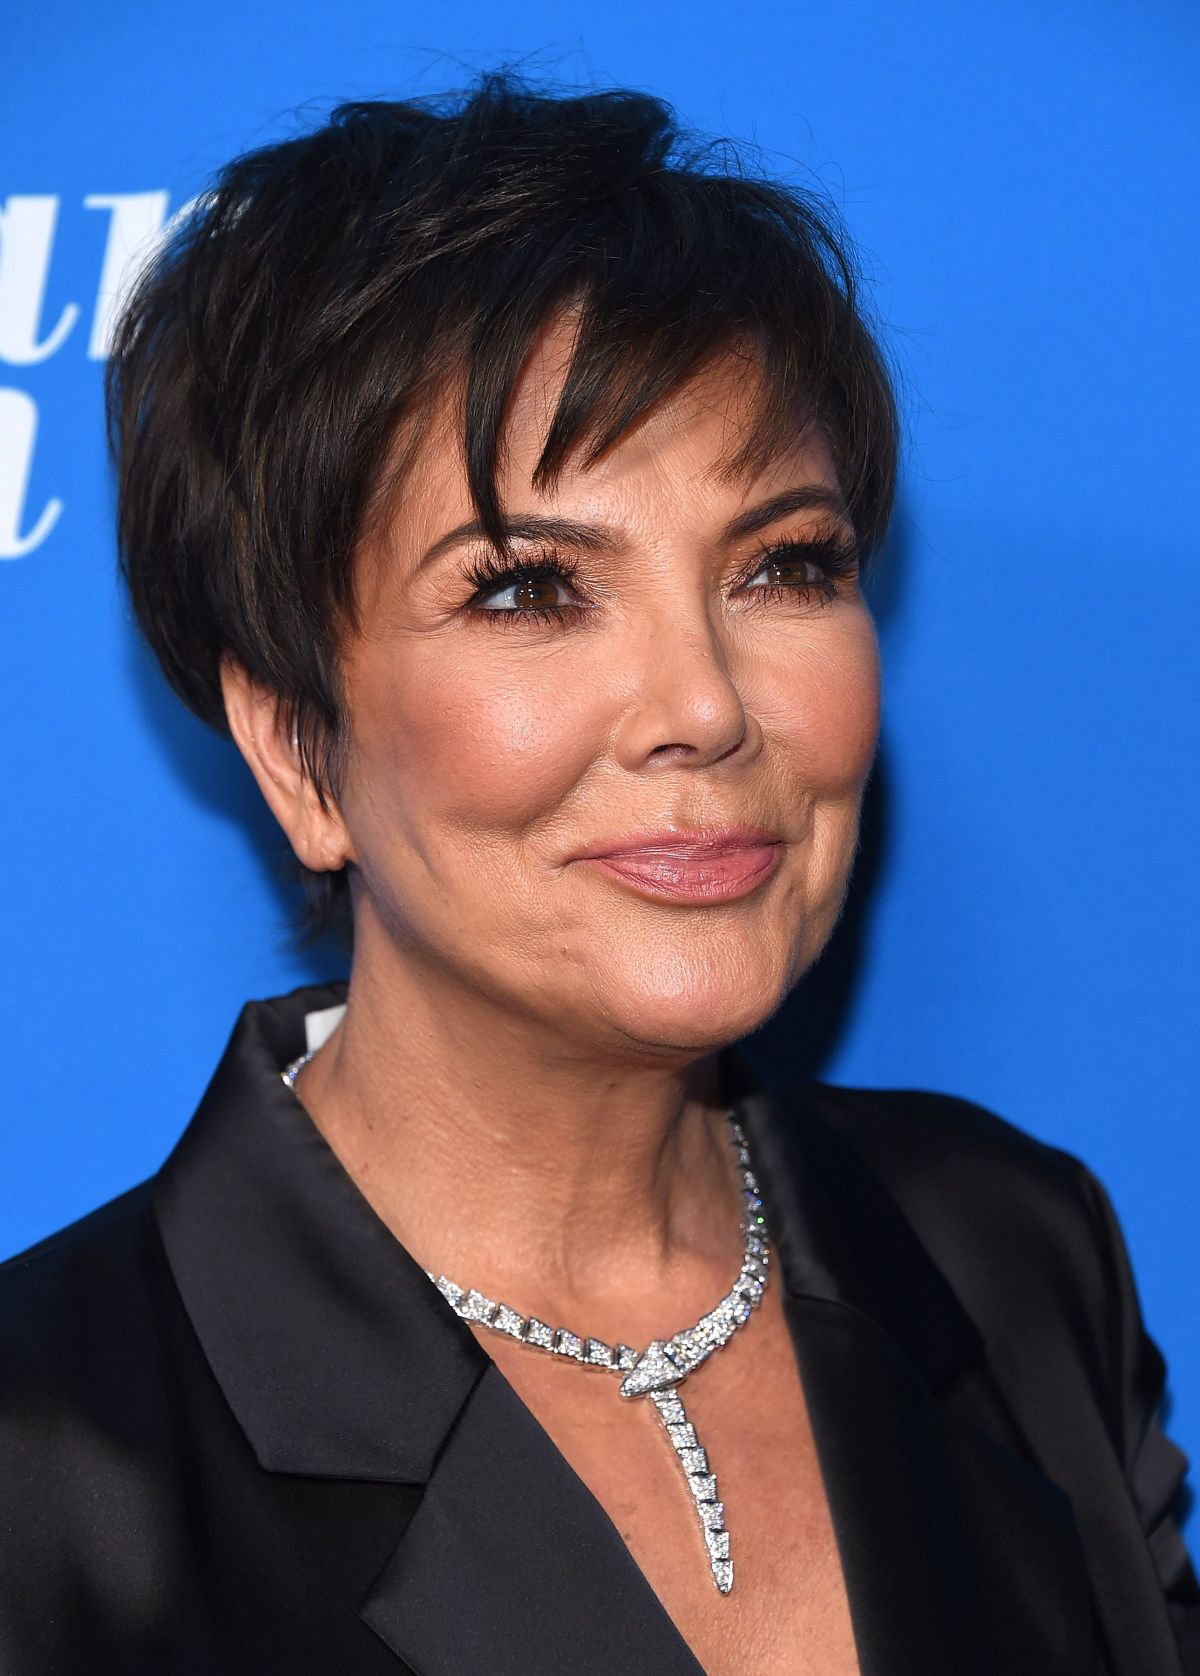 Kris Jenner At American Woman Premiere Party In Los Angeles 05 31 2018 10 